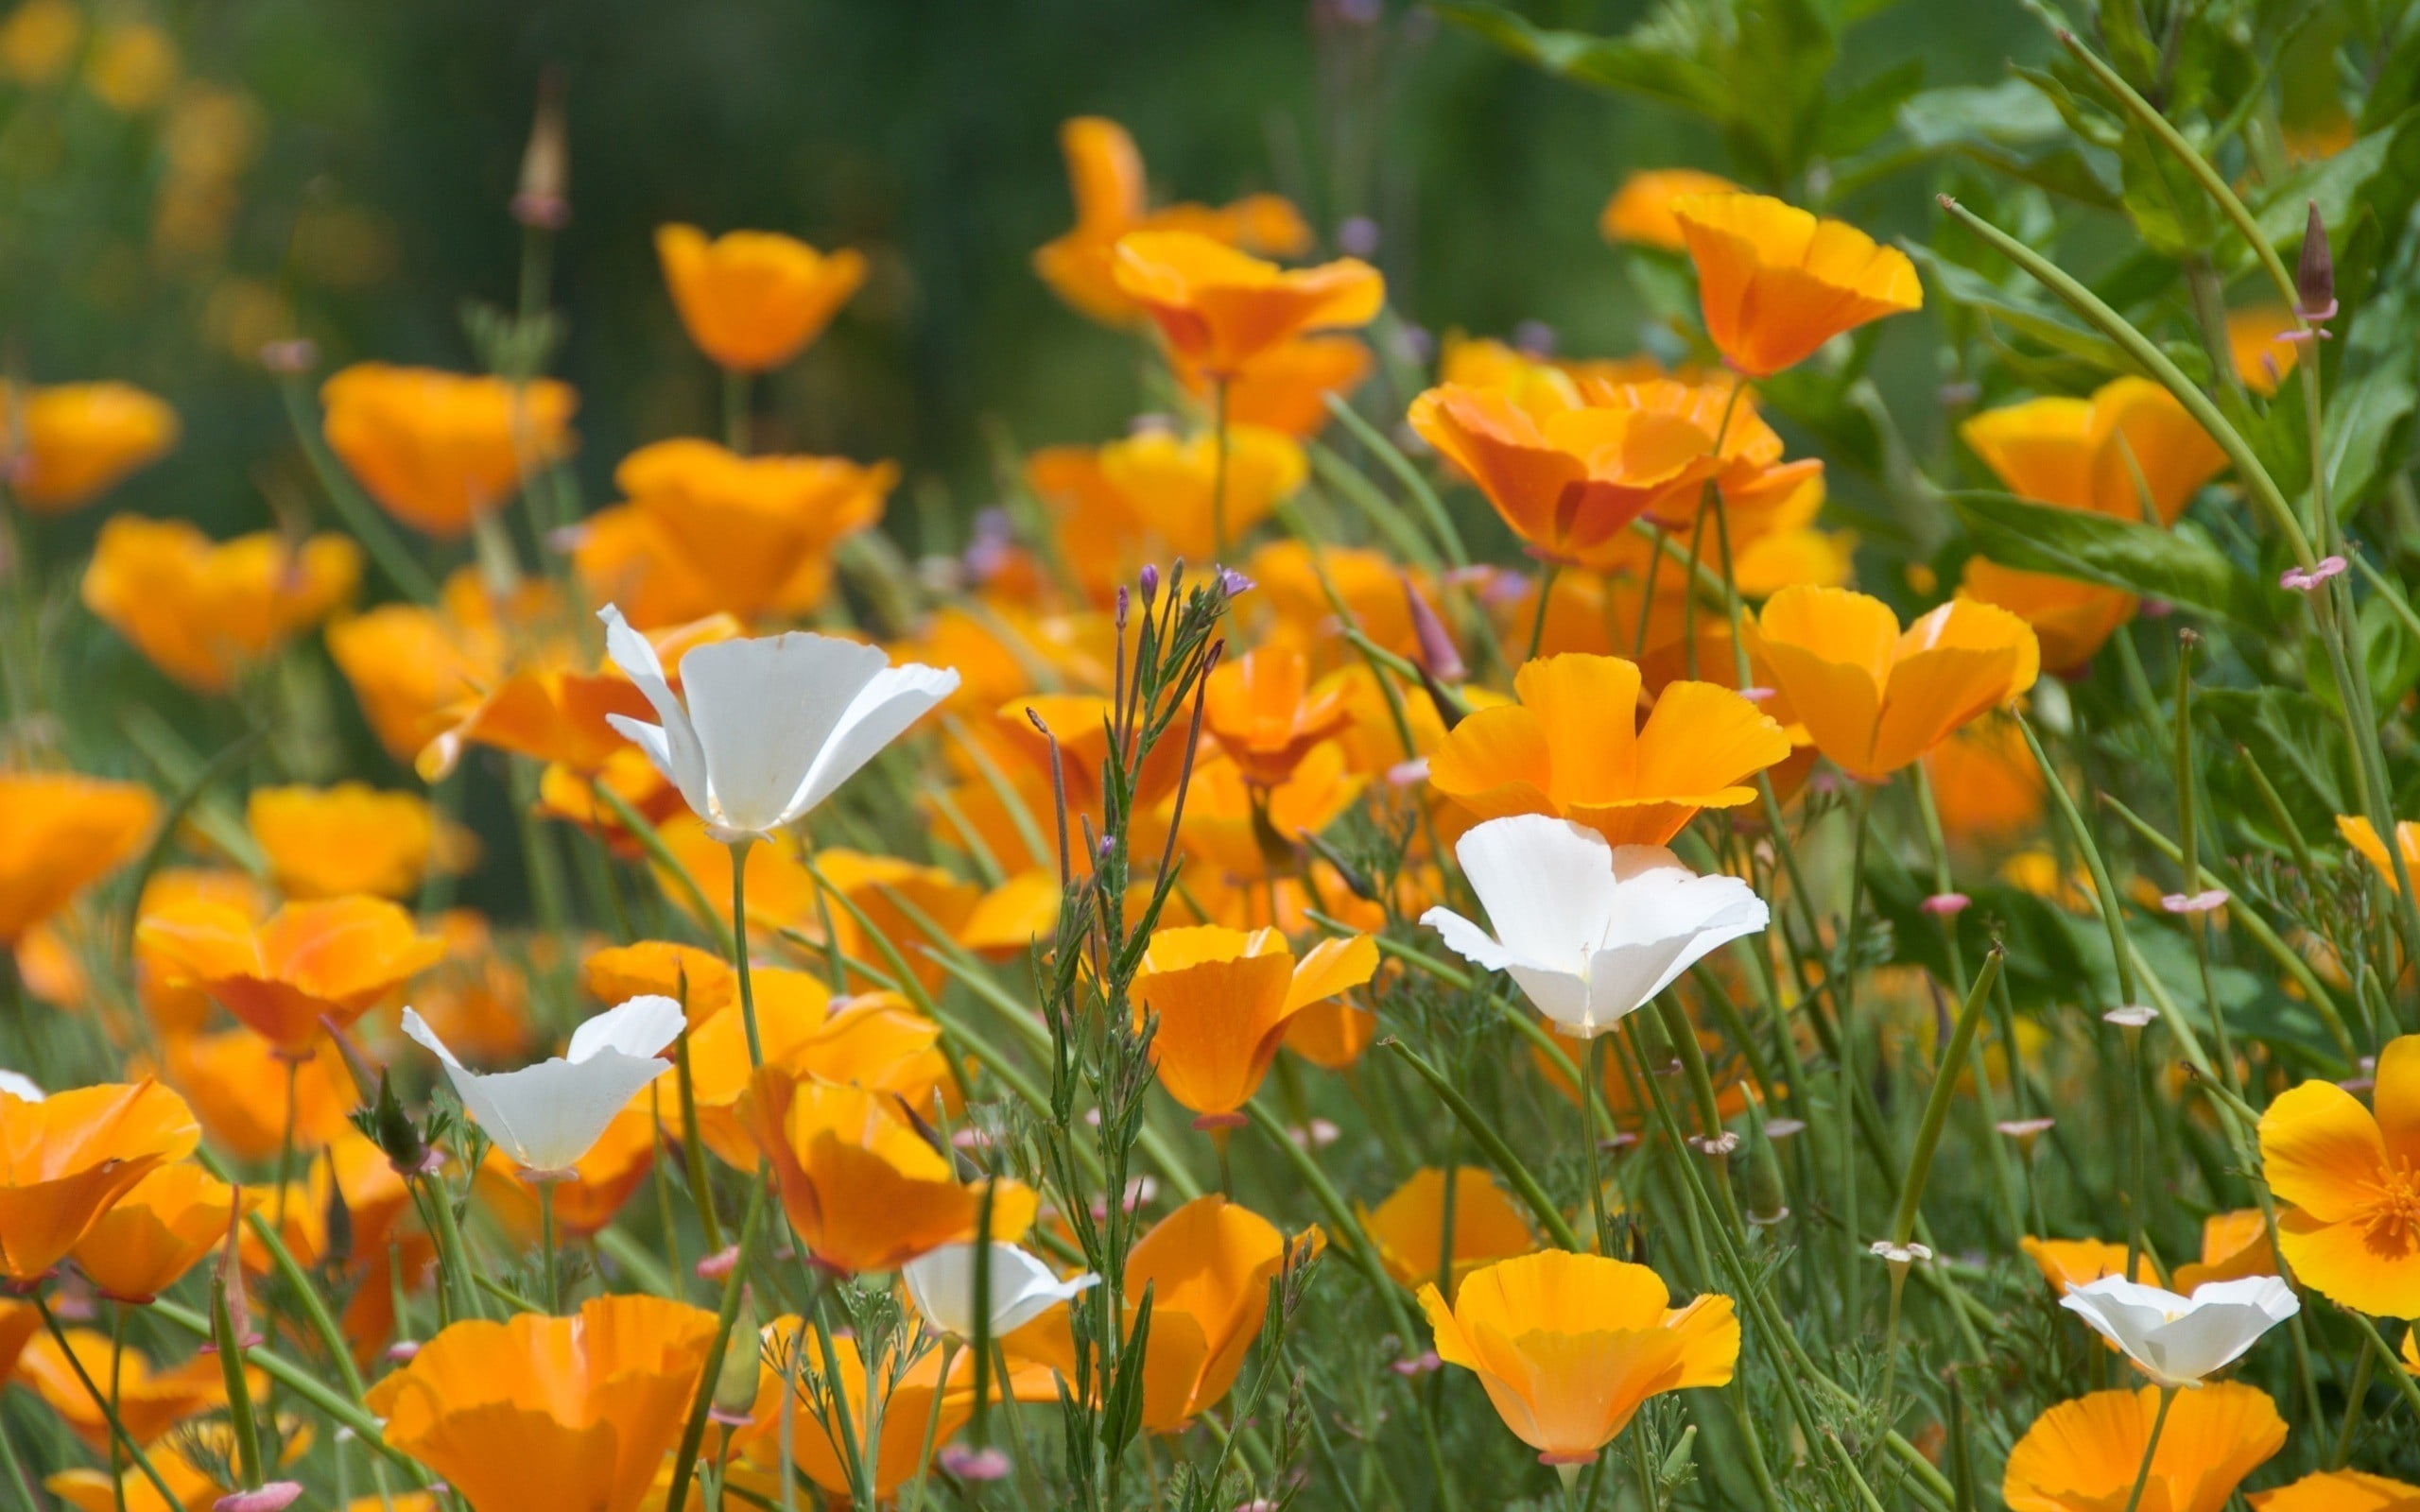 Wallpaper or Background of Yellow California Poppy Blossoms Stock Photo   Image of outdoor wallpaper 173692370